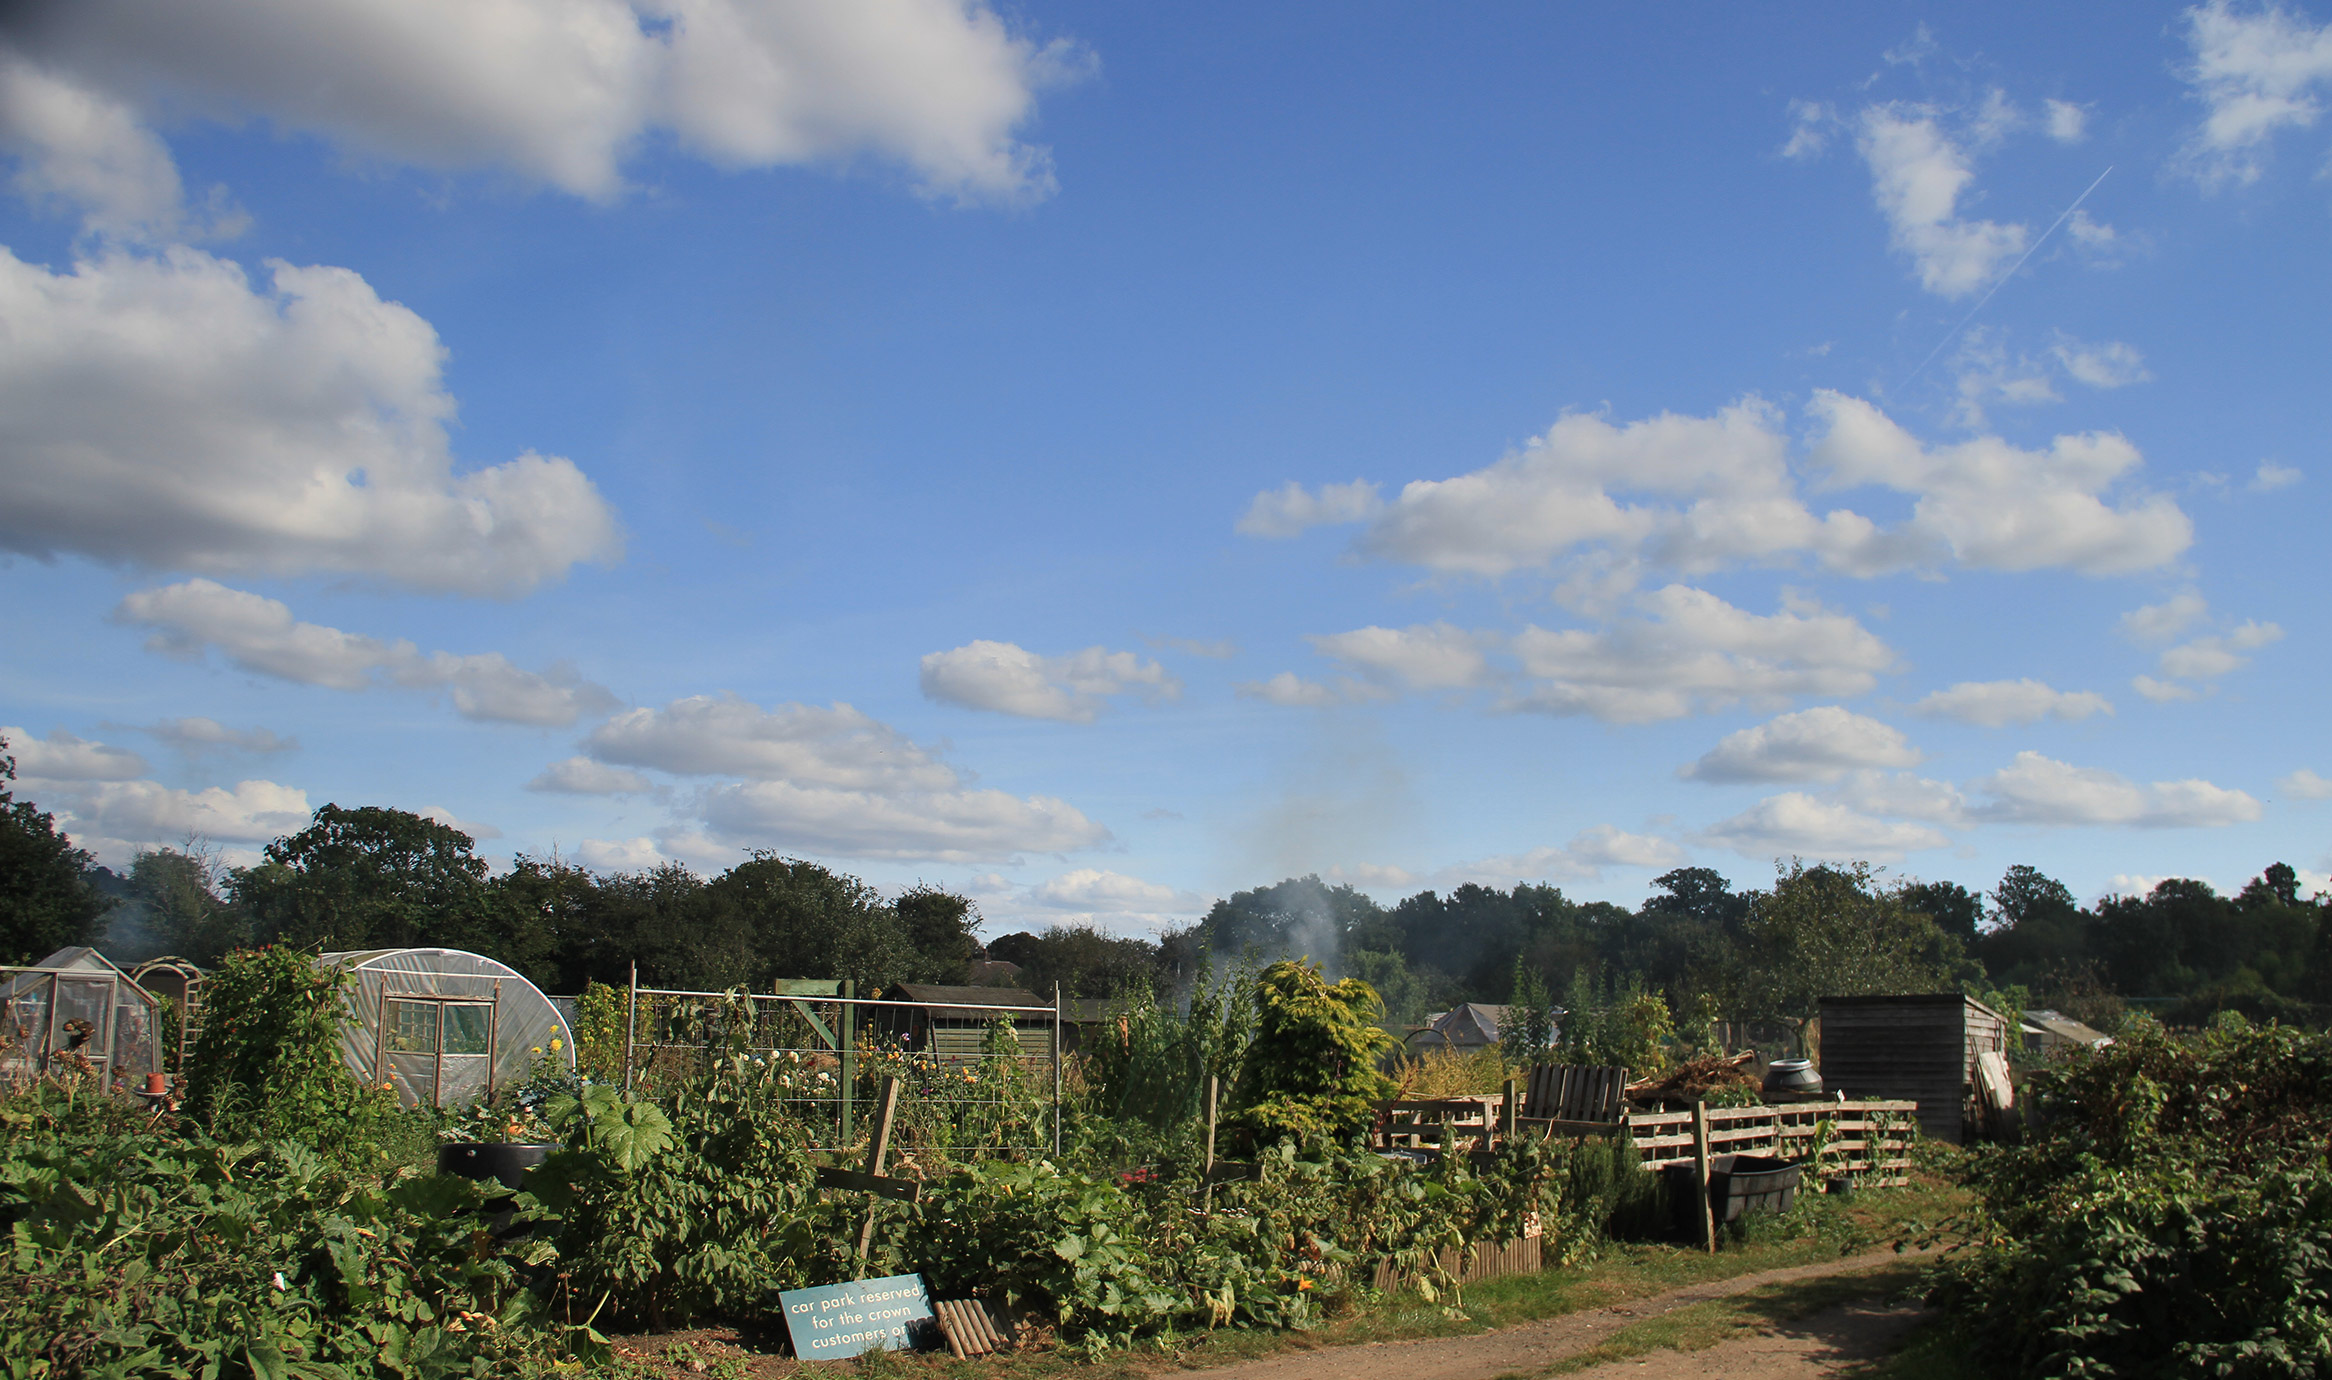 A high-resolution photograph of an allotment in England.